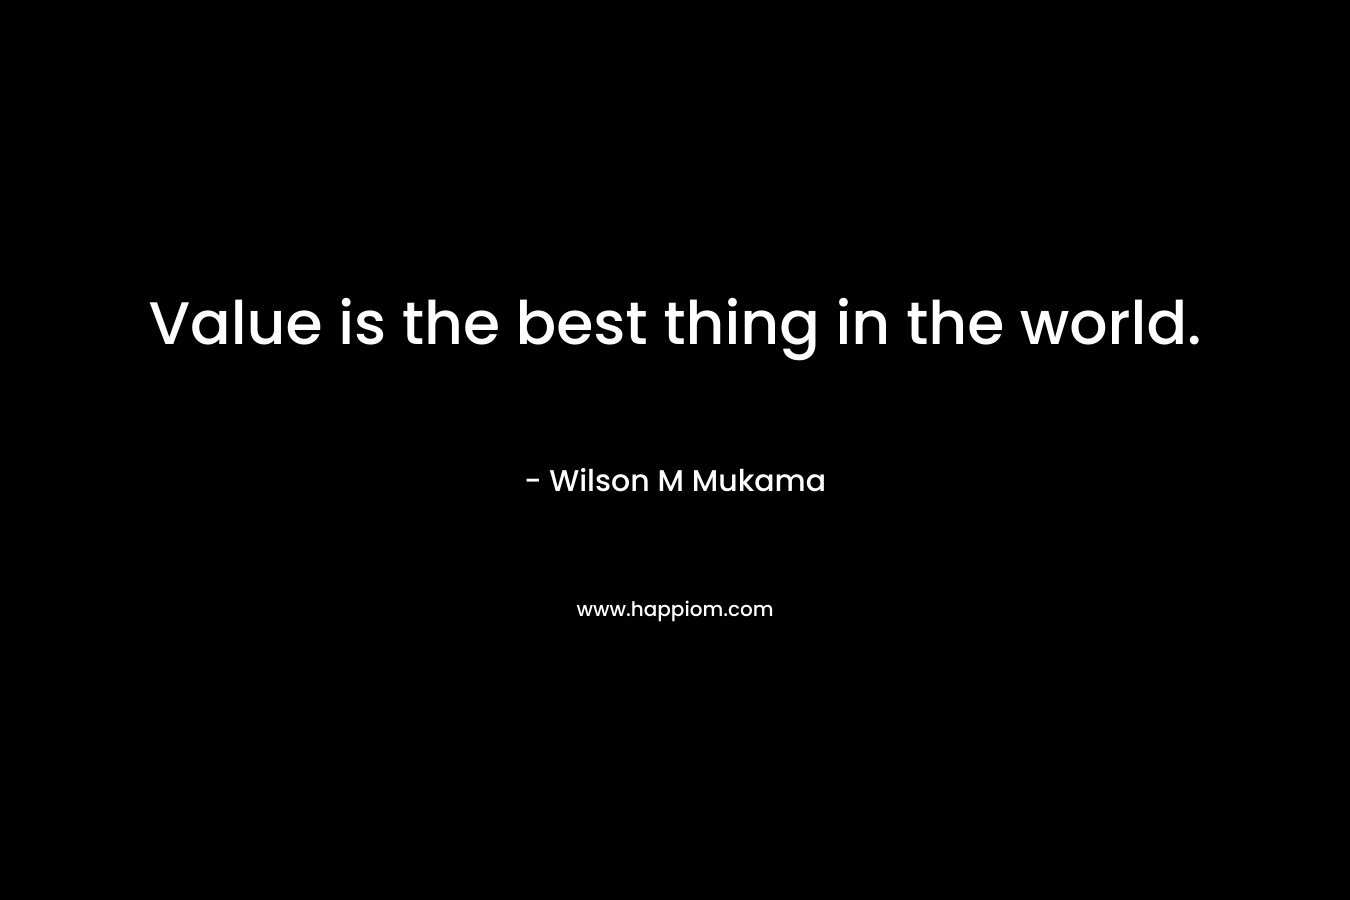 Value is the best thing in the world.